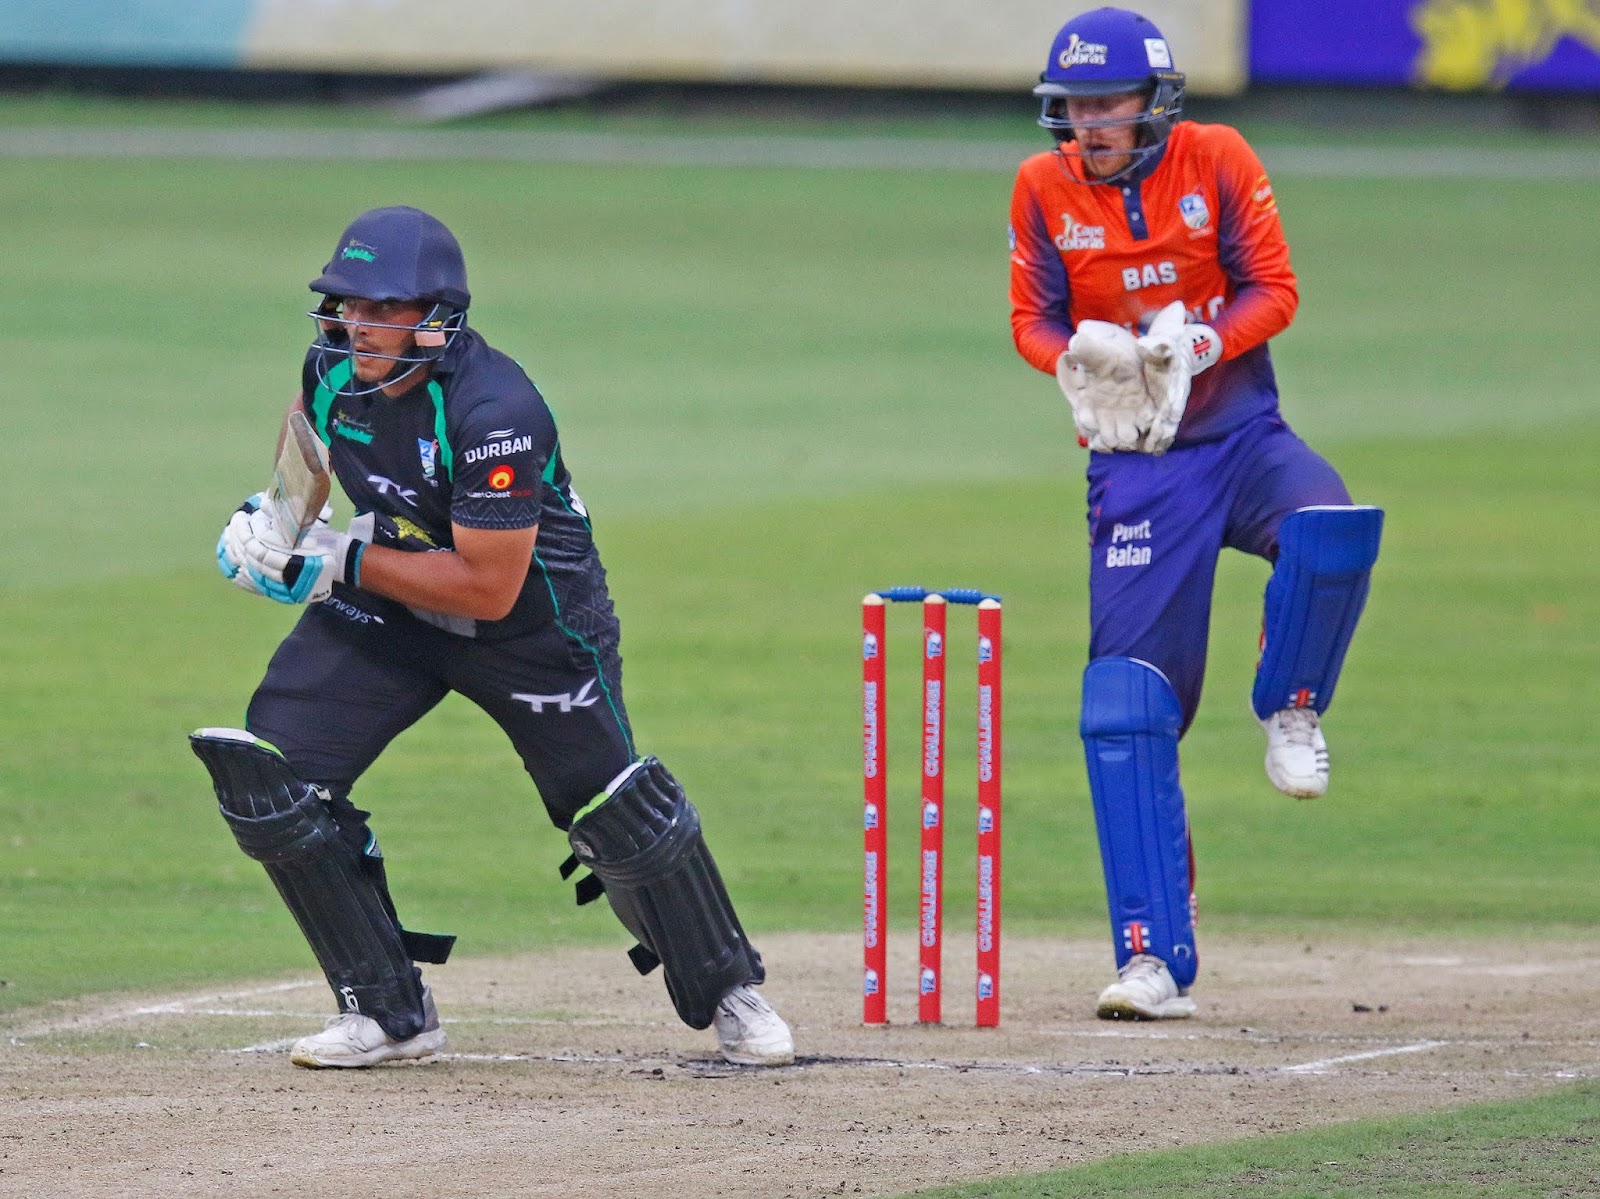 Vaughn van Jaarsveld batting for the Hollywoodbets Dolphins against the Cape Cobras in the CSA T20 Challenge 2018/19